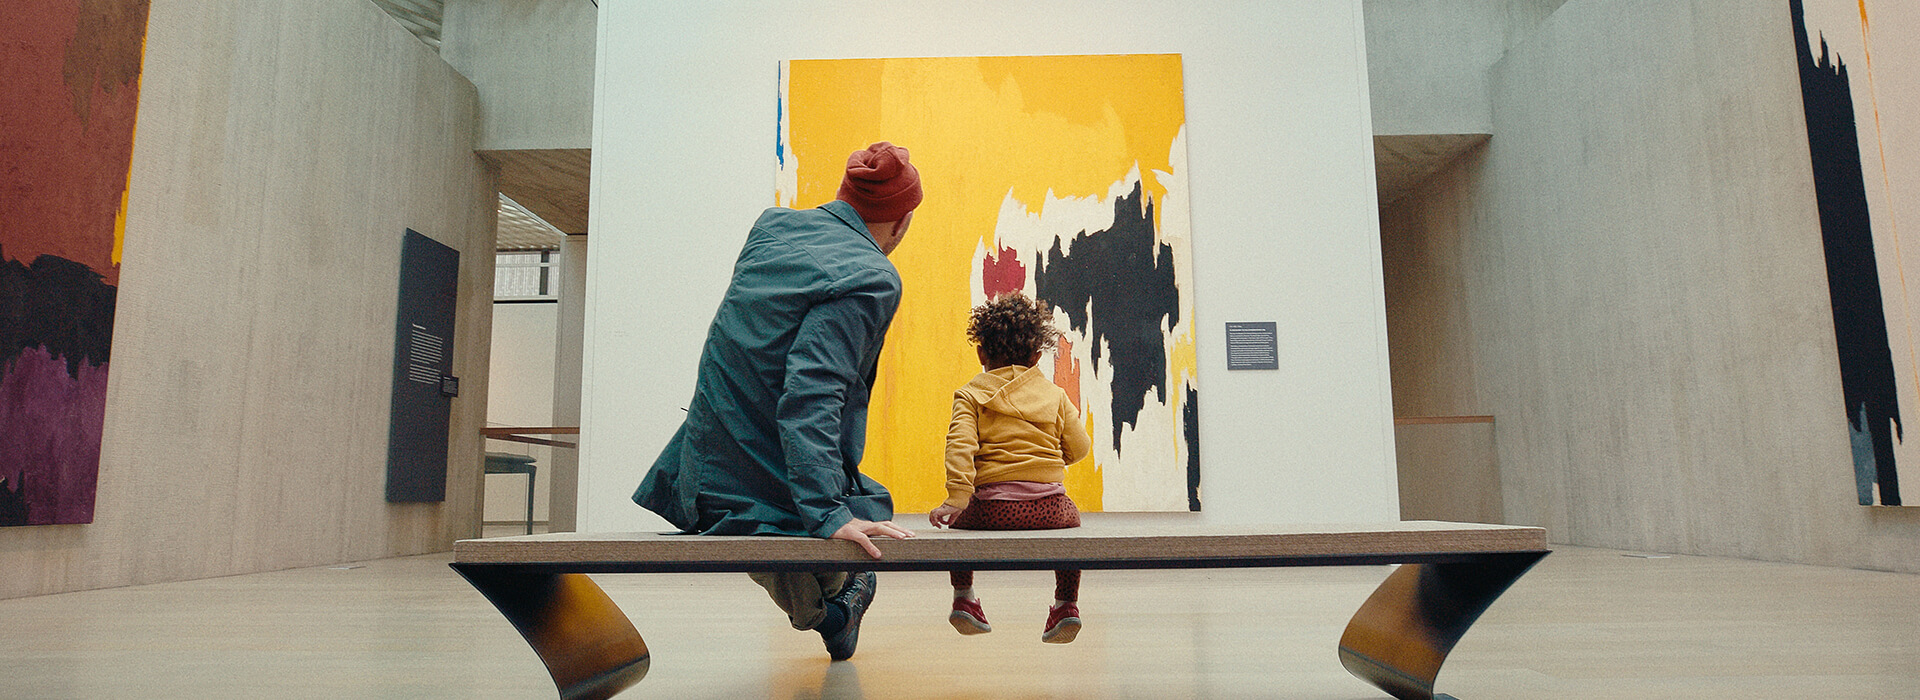 A father sits next to his toddler son on a bench as they look at a large yellow abstract painting